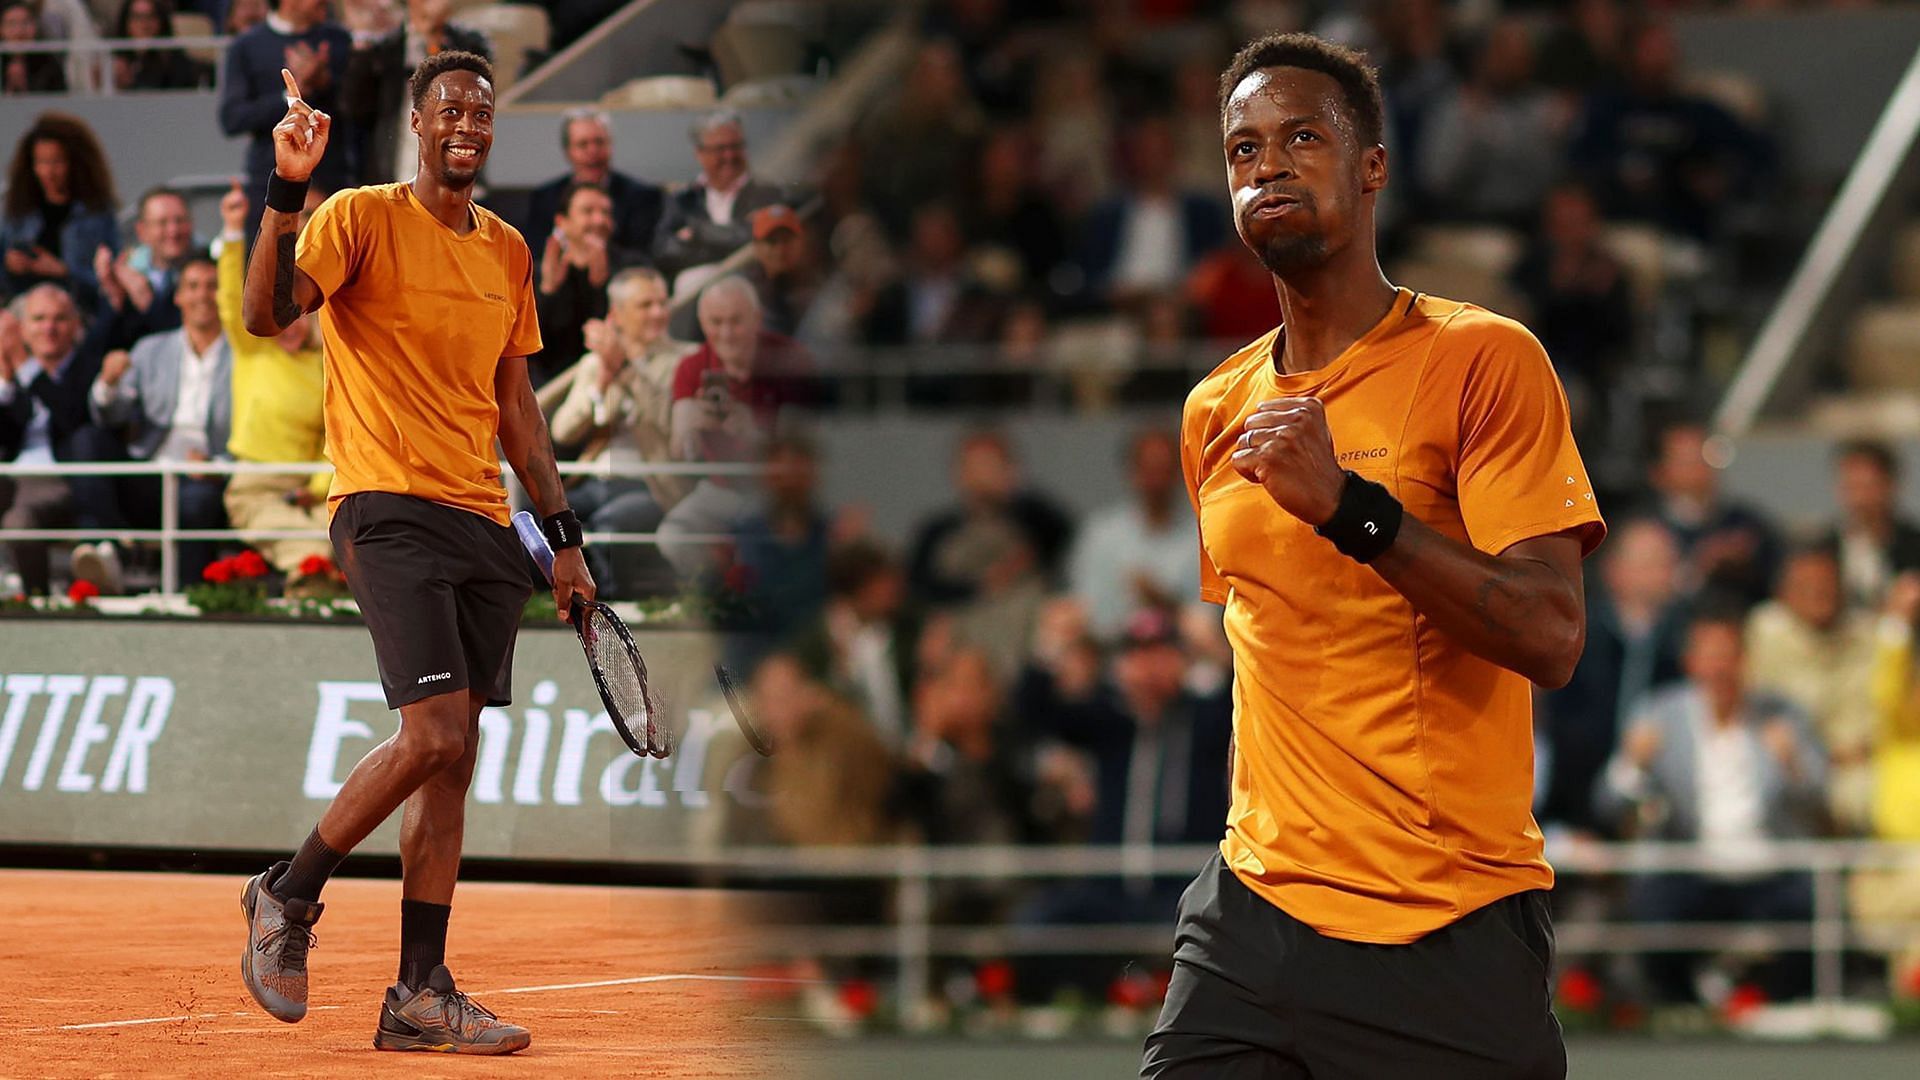 Gael Monfils experiences an emotional moment as he outlasts his opponent in the first round of the 2023 French Open 